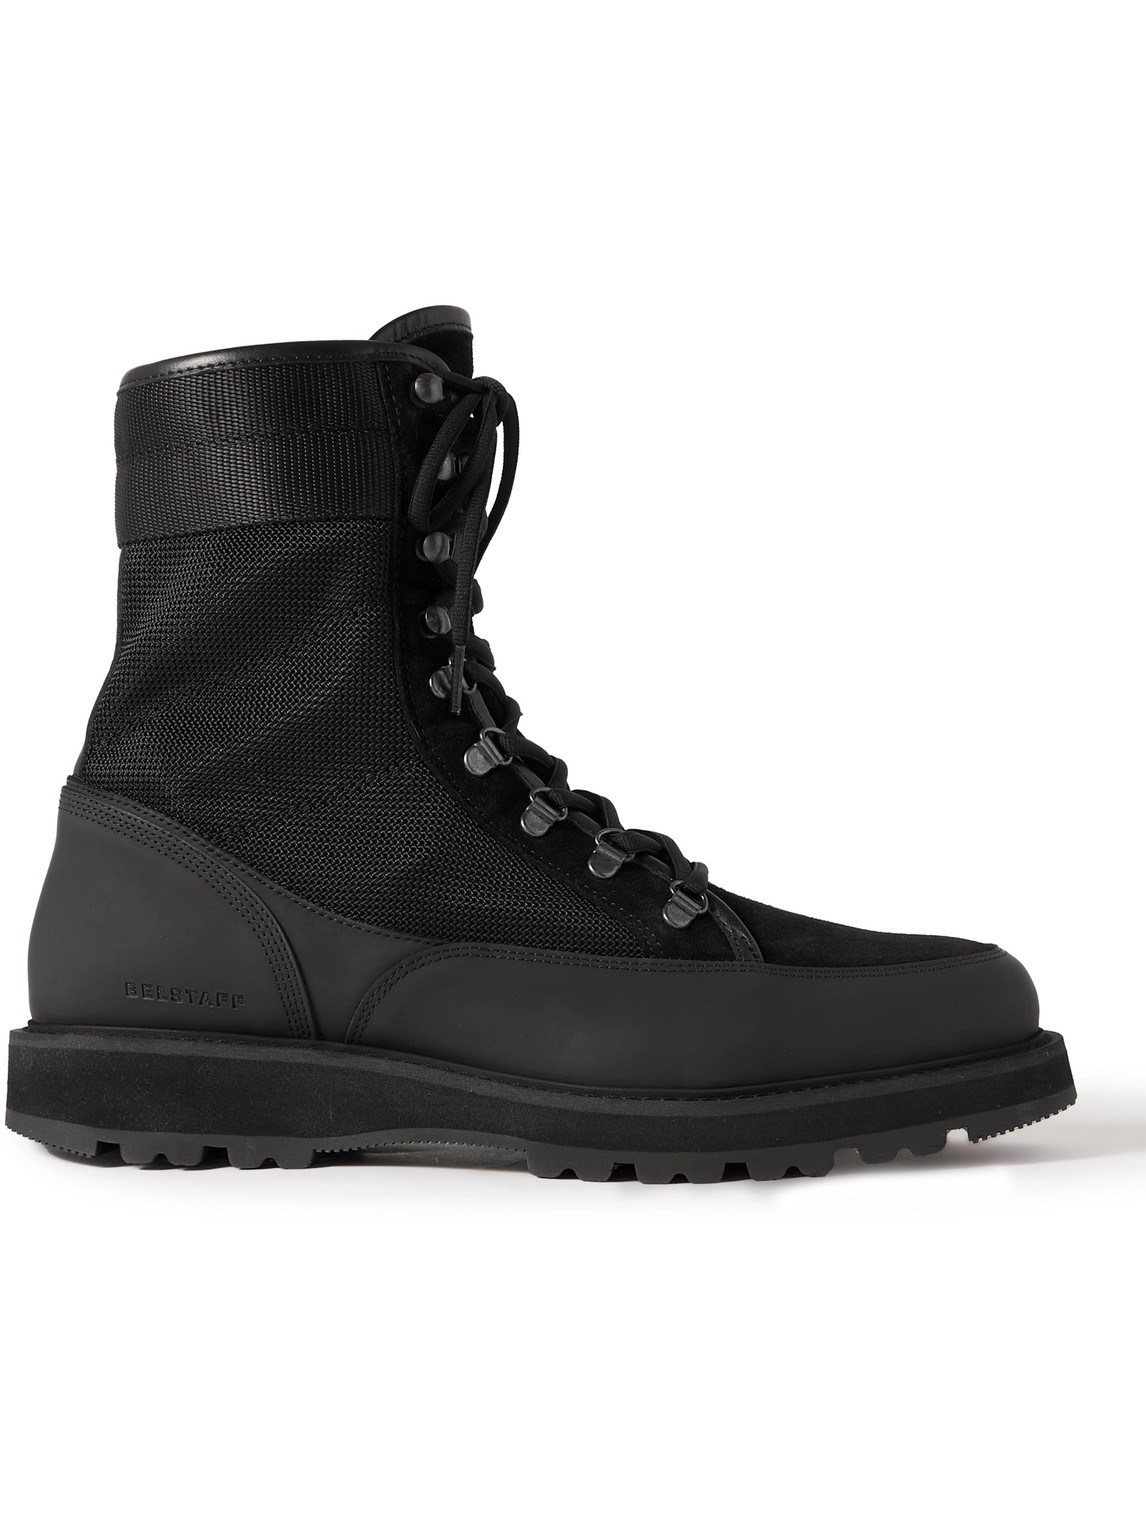 BELSTAFF STORMPROOF LEATHER, SUEDE AND MESH BOOTS